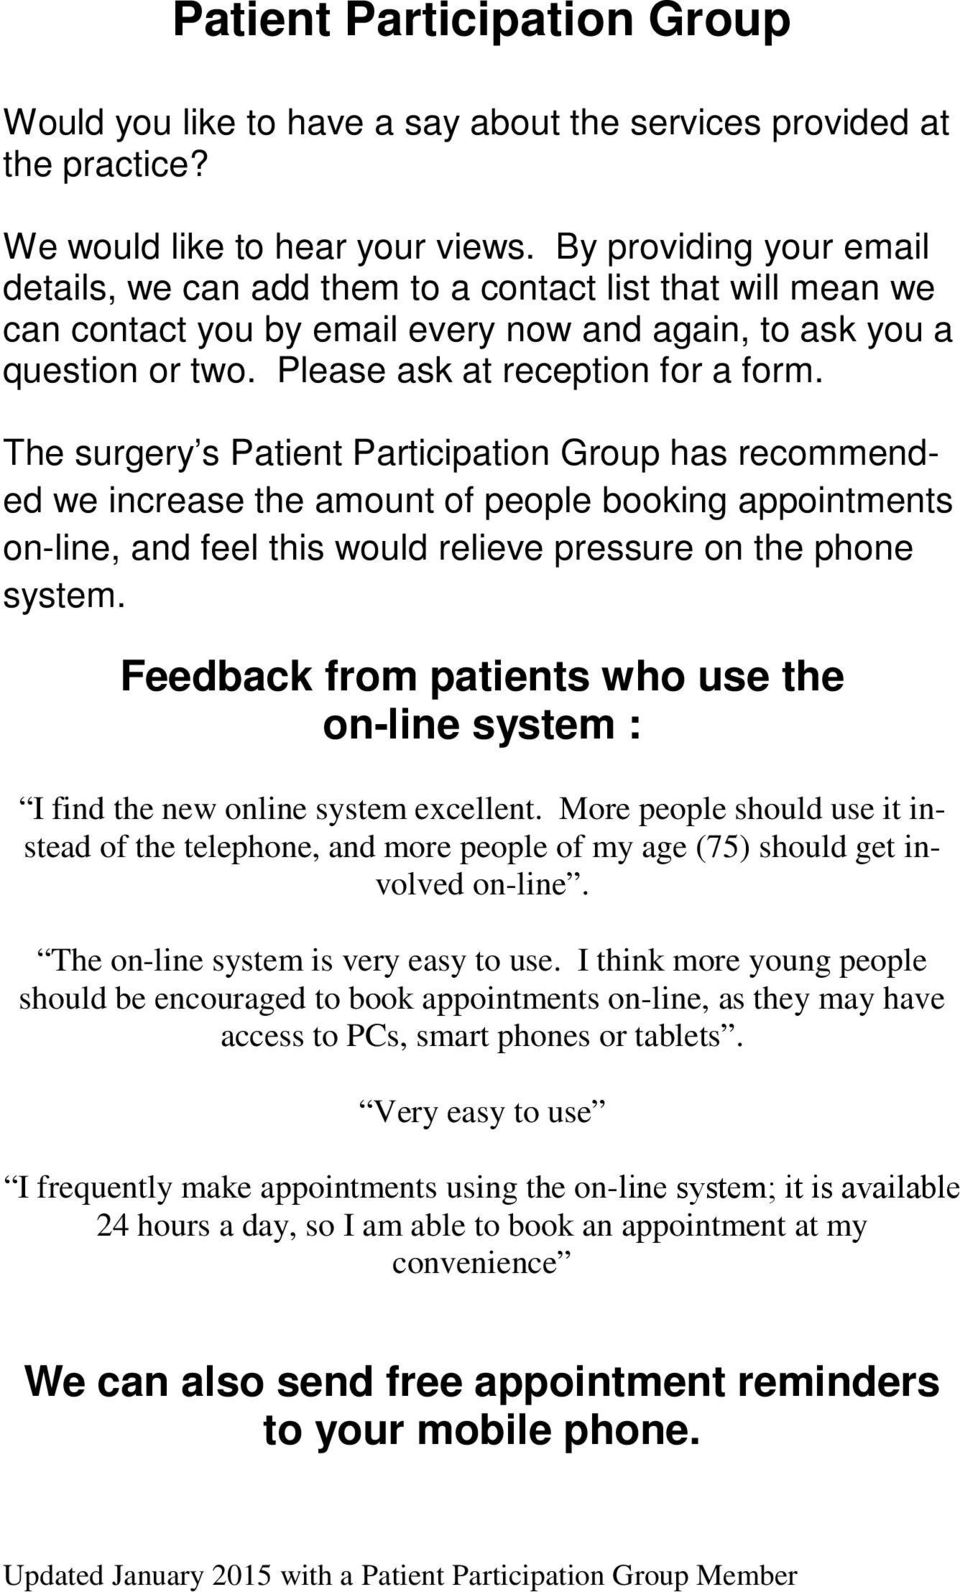 The surgery s Patient Participation Group has recommended we increase the amount of people booking appointments on-line, and feel this would relieve pressure on the phone system.